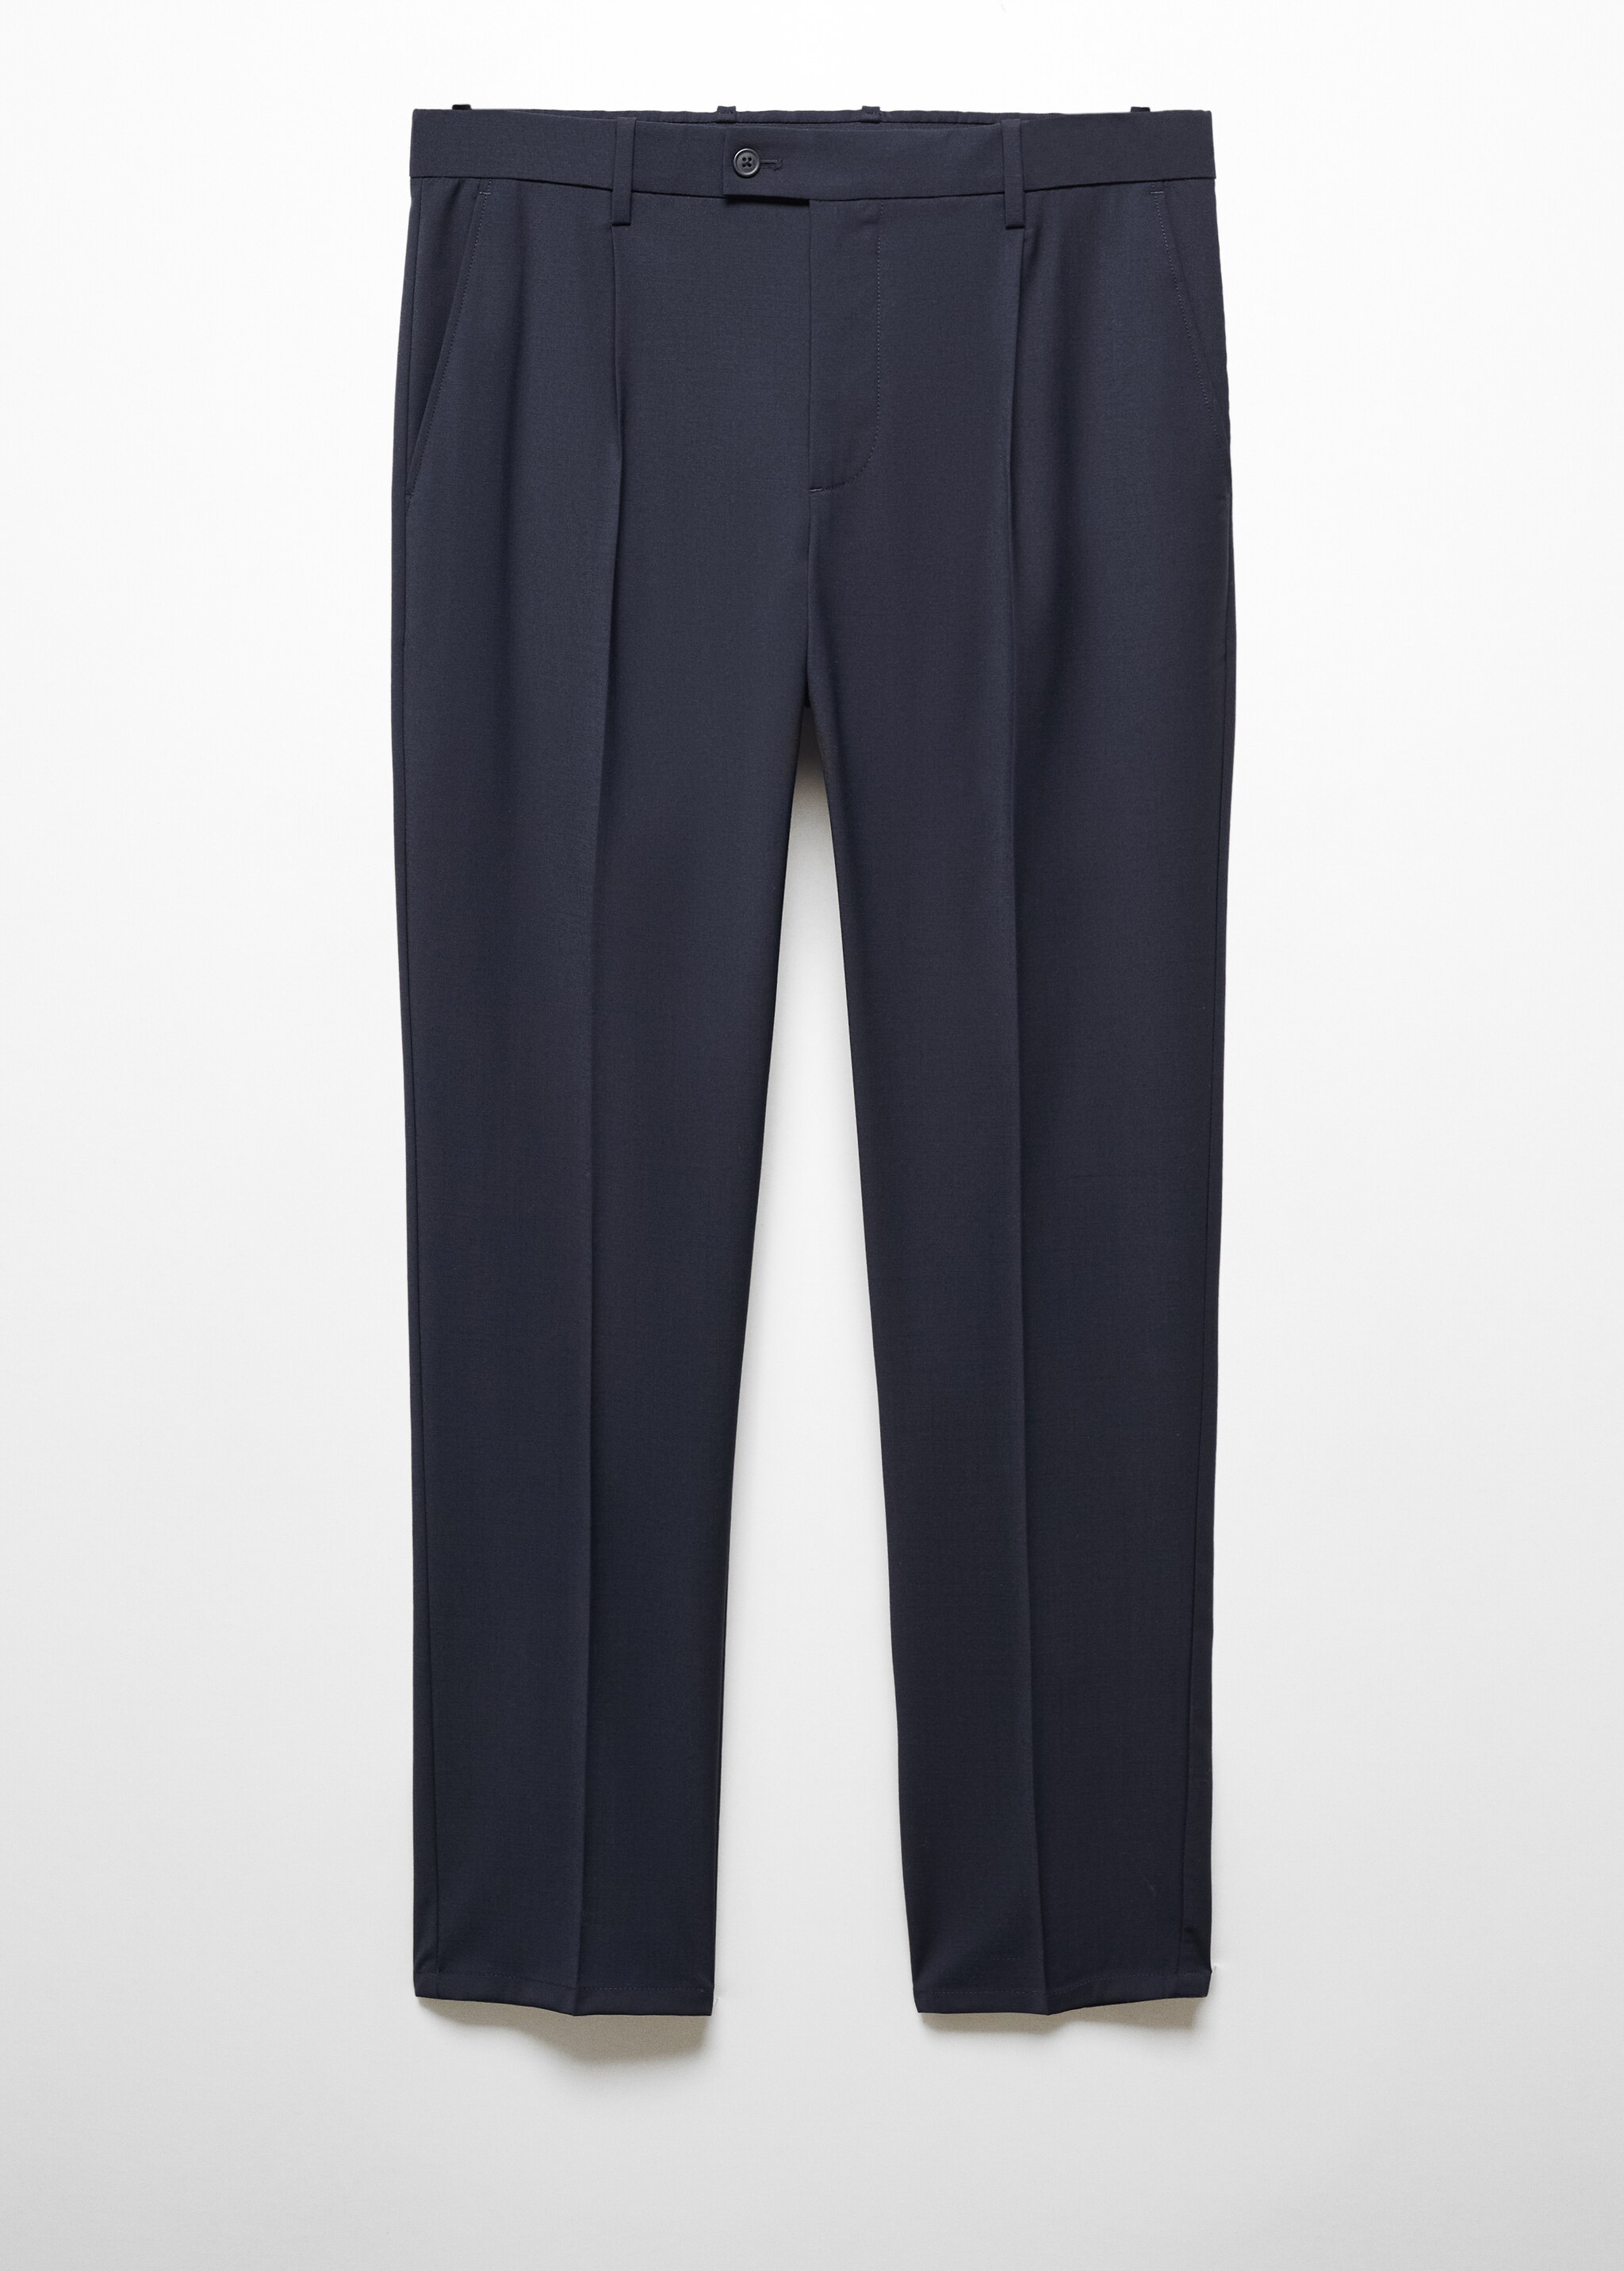 Cold wool trousers with pleat detail - Article without model